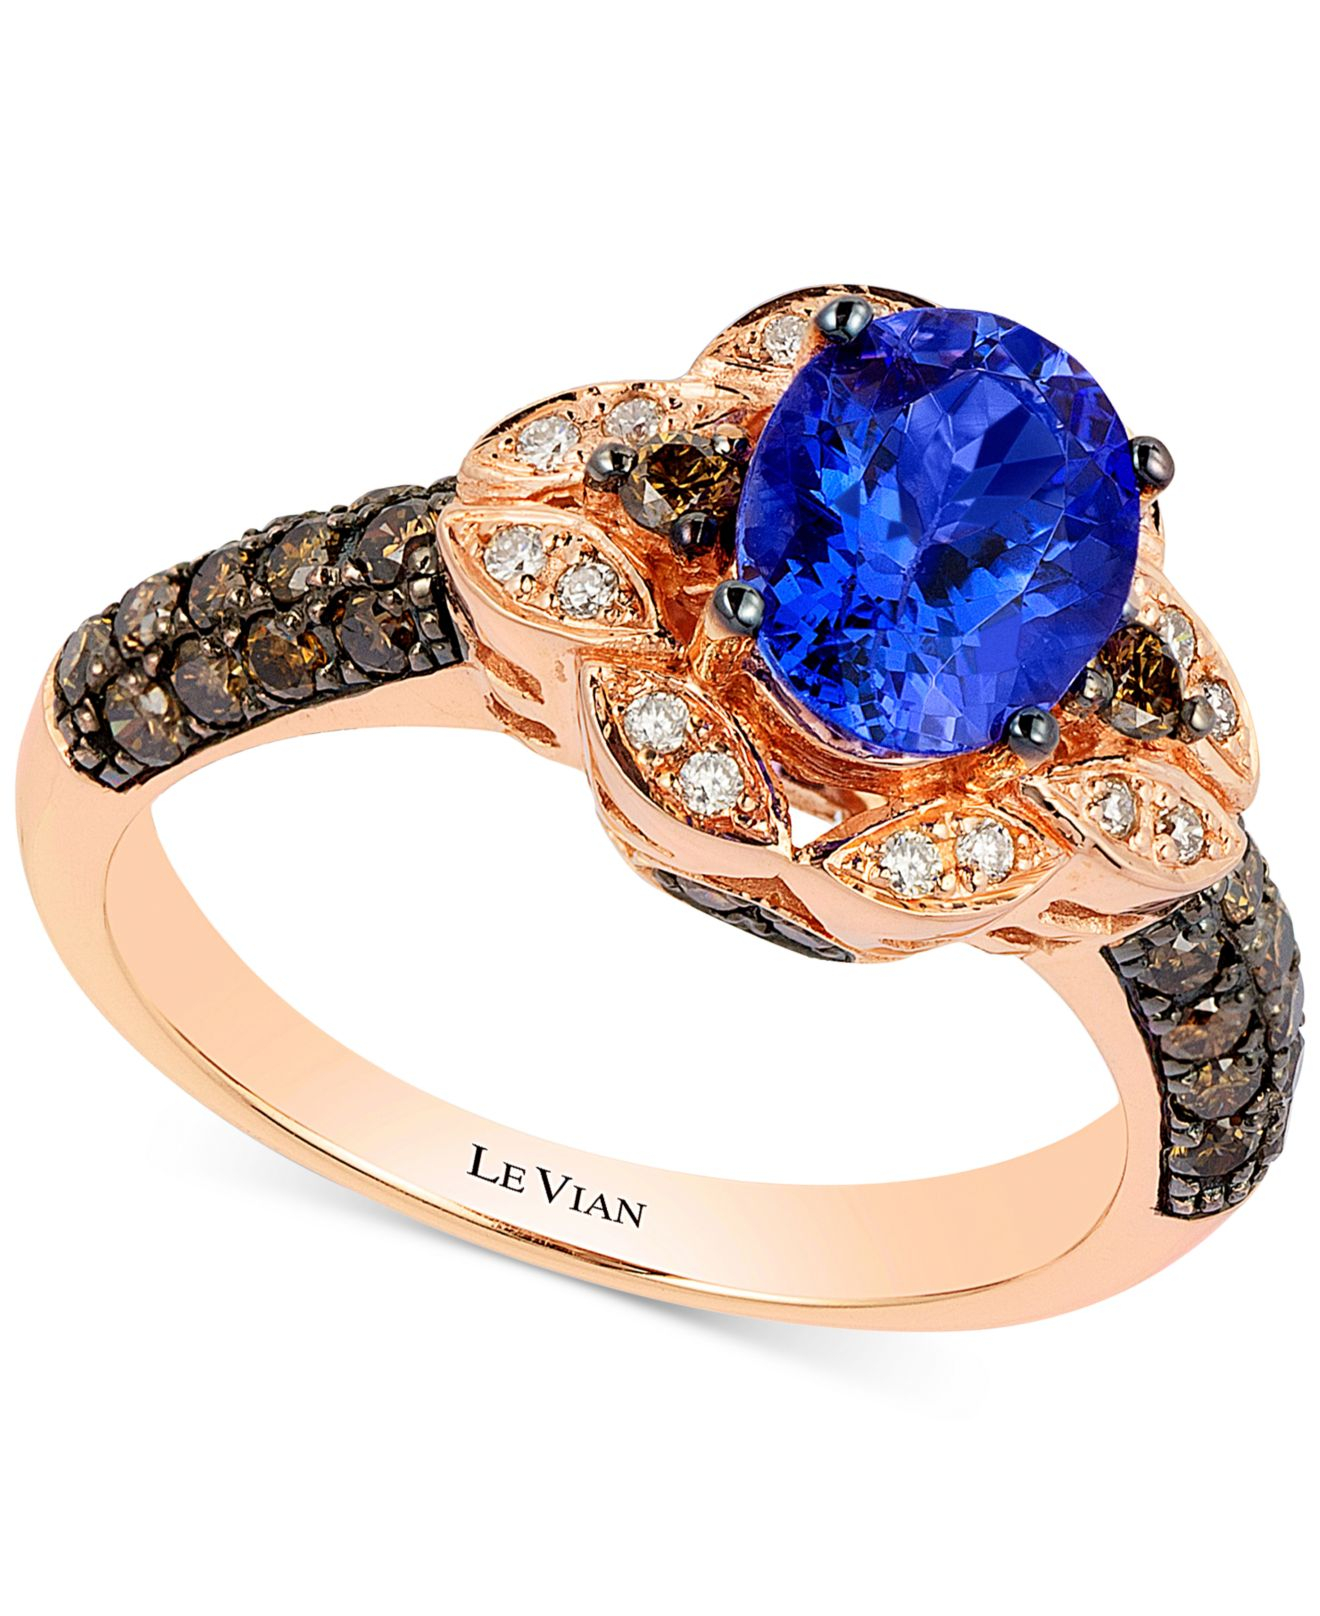 Le vian Chocolatier® Blueberry Tanzanite (1 Ct. T.w) And Diamond (2/3 Ct. T.w) Ring In 14k Rose